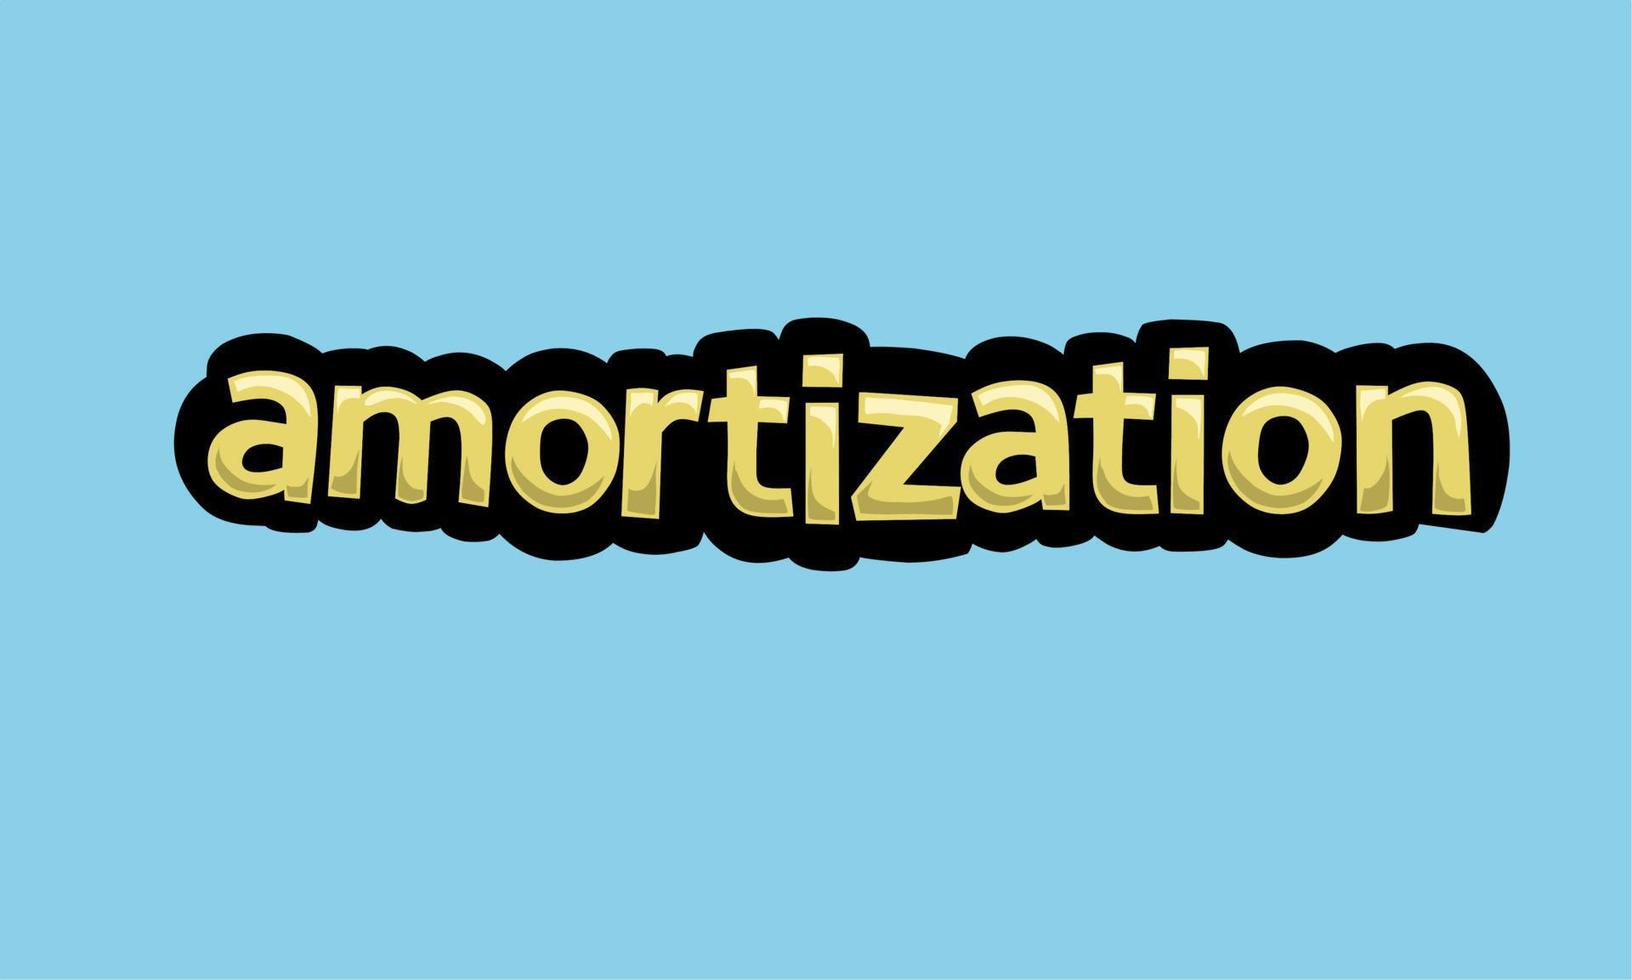 AMORIZATION writing vector design on a blue background